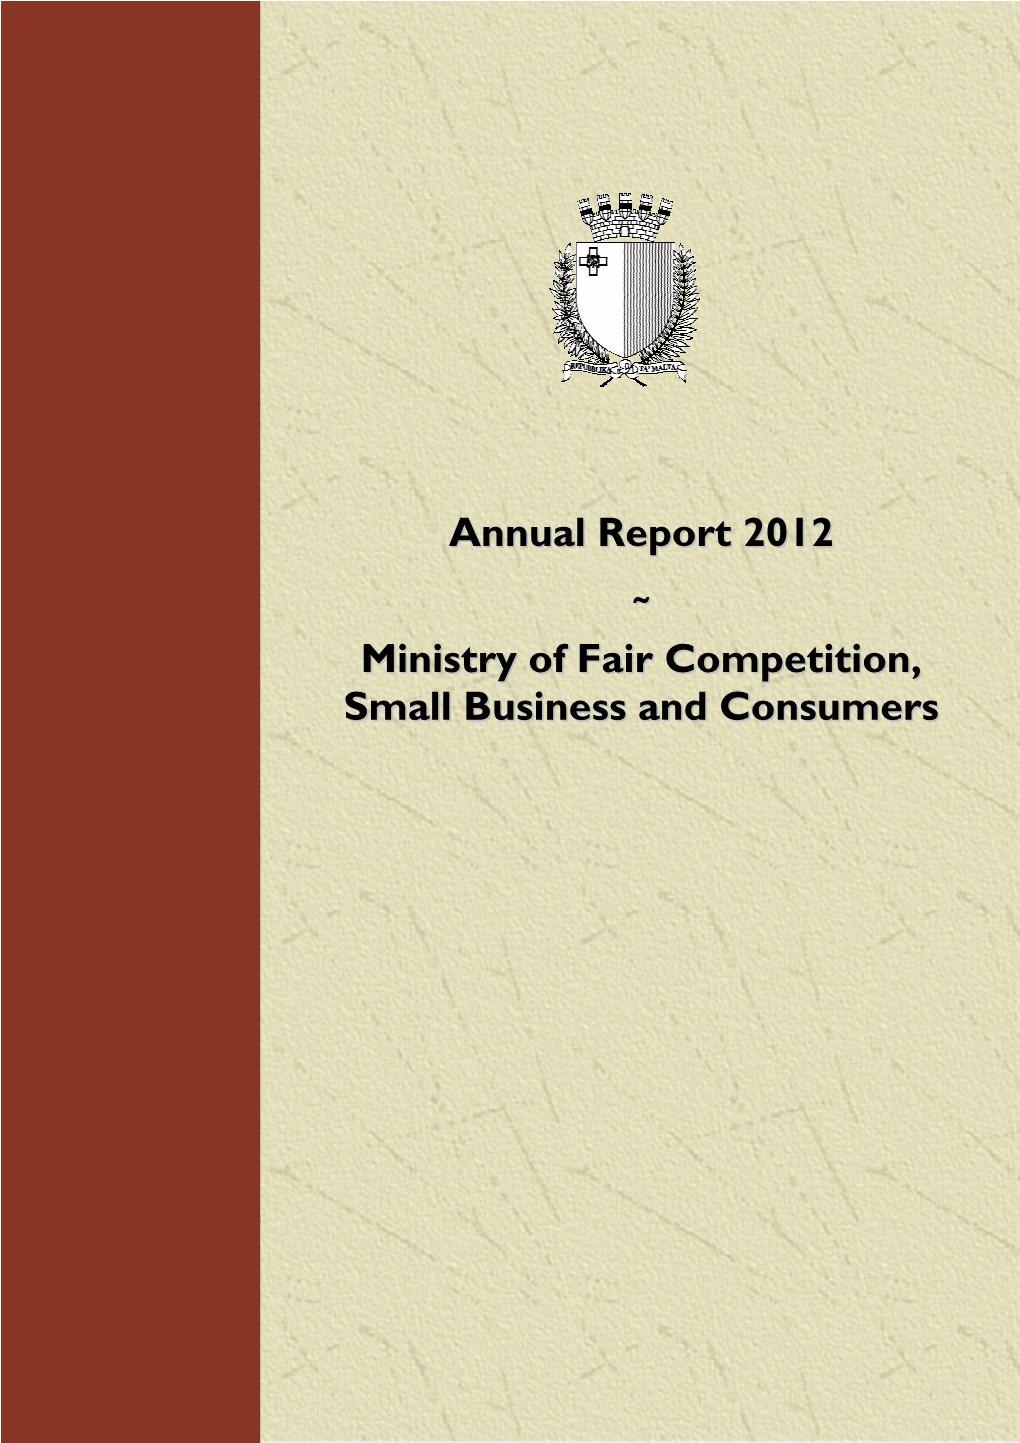 Ministry for Fair Competition, Small Business and Consumers